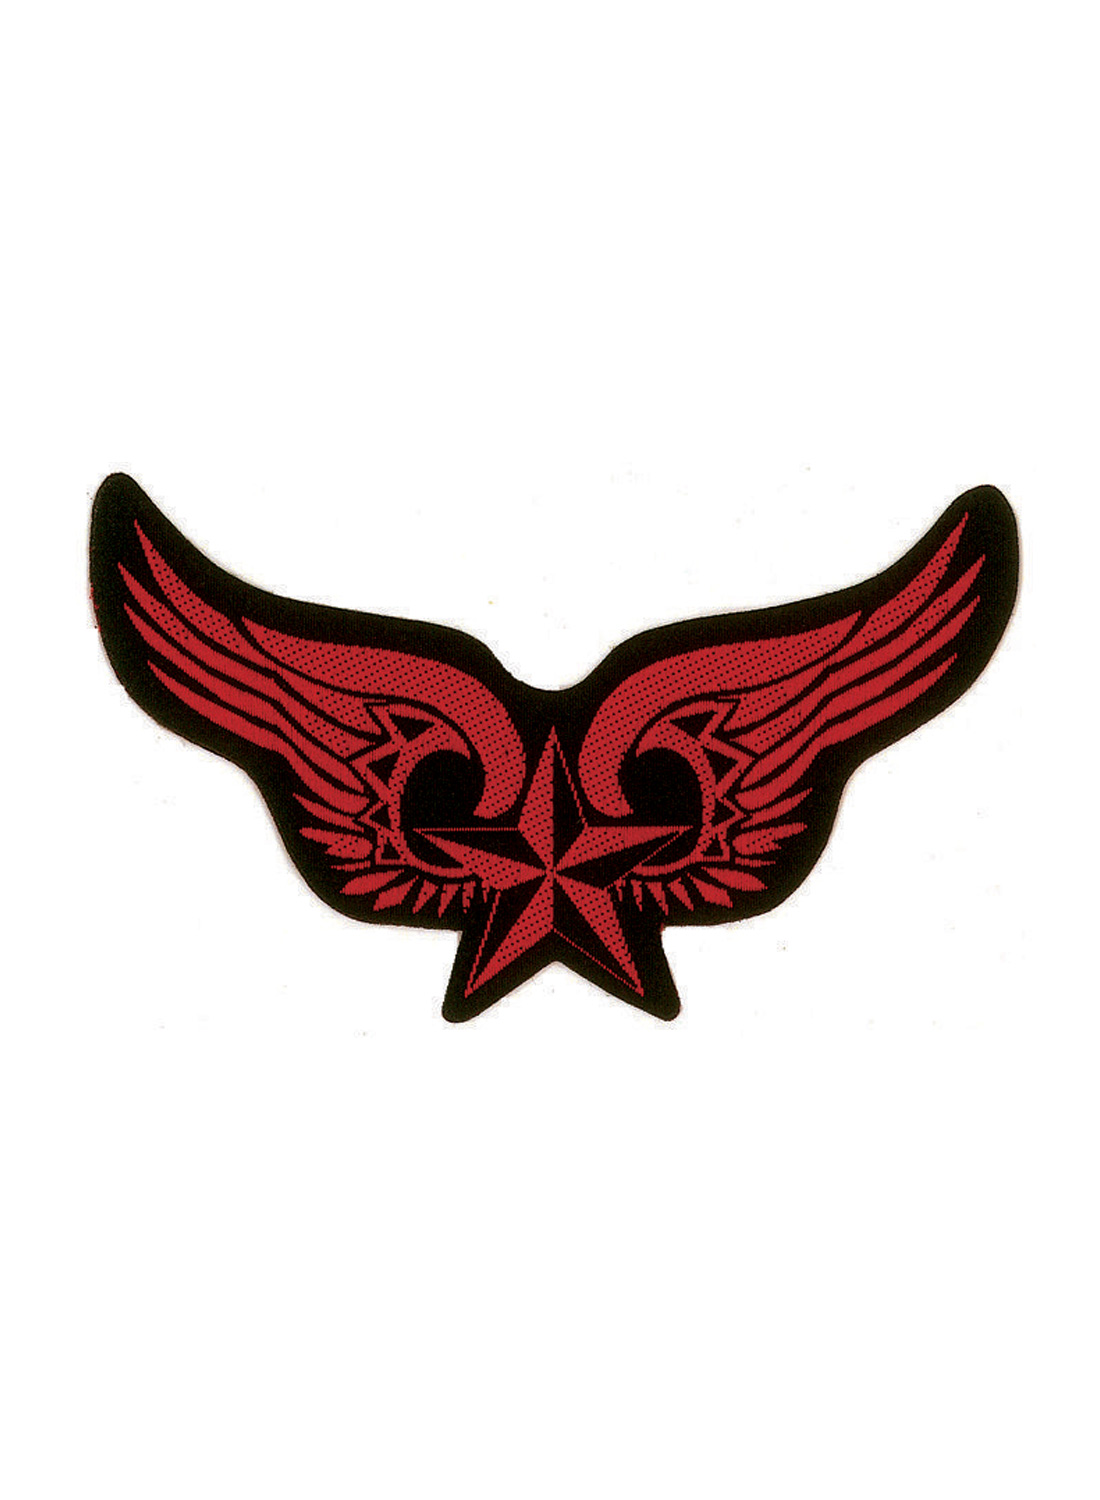 Winged Nautical Star Patch